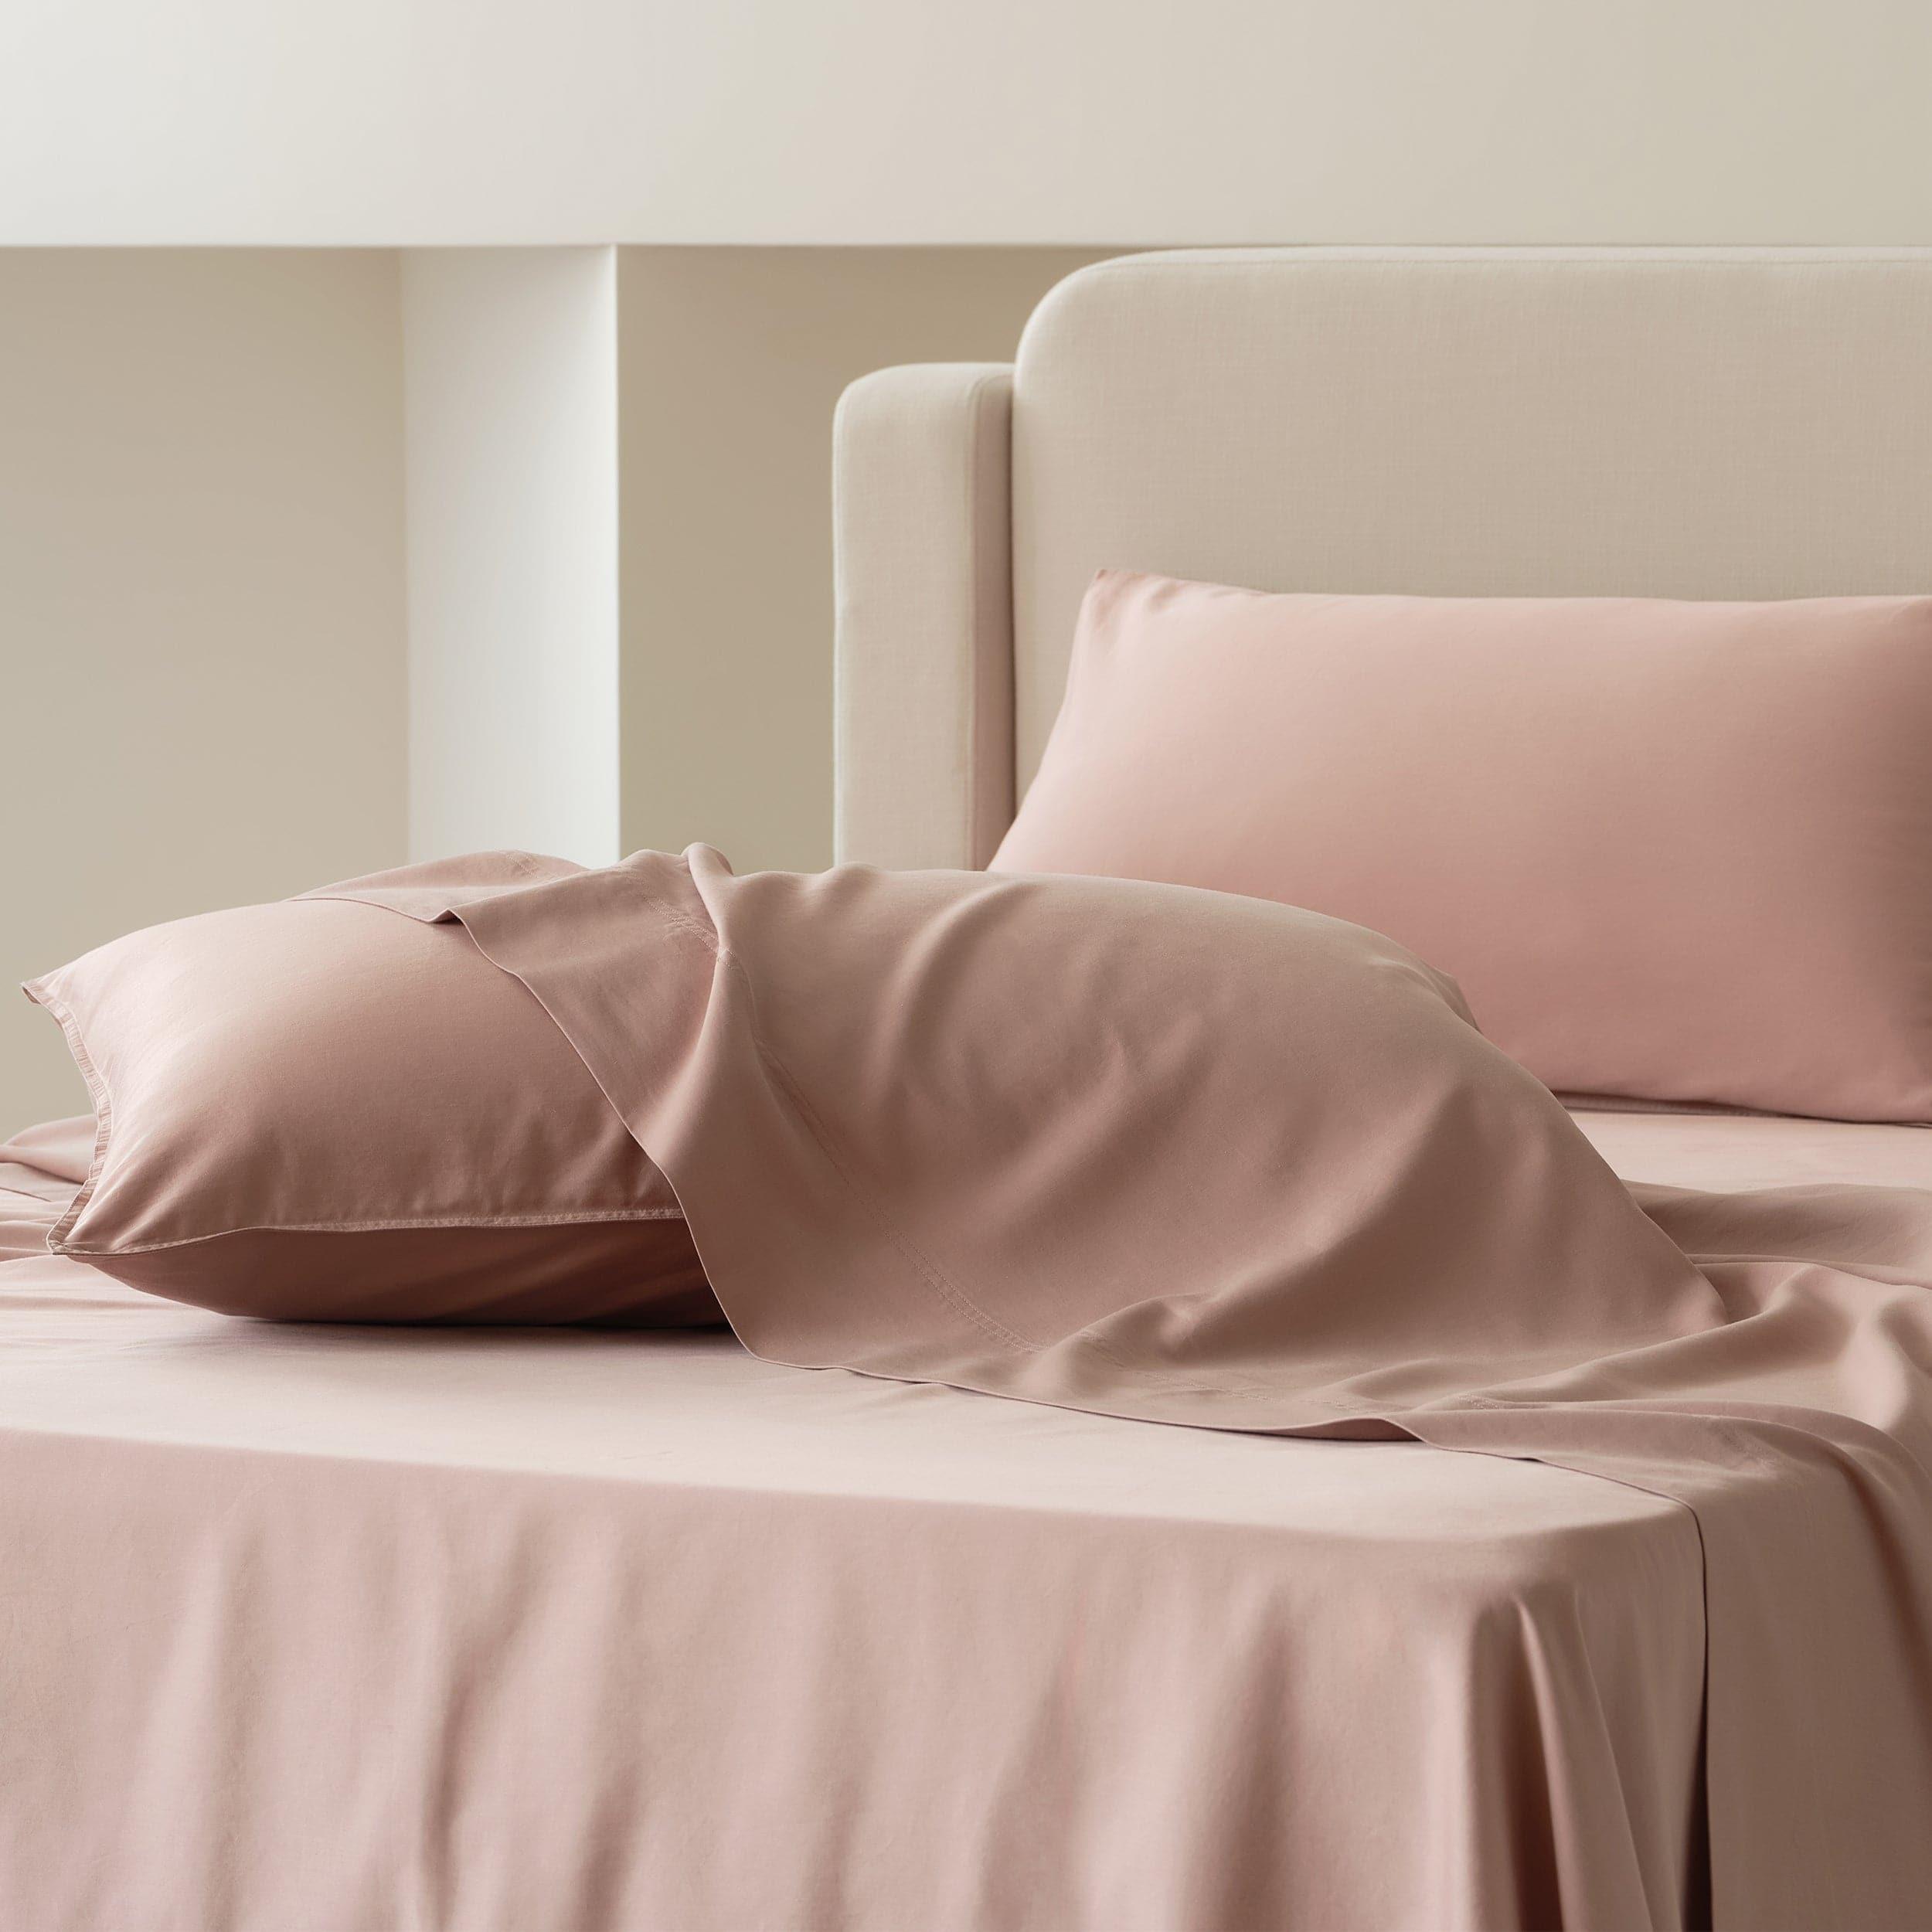 Dress your queen size bed with a cozy sheet set.